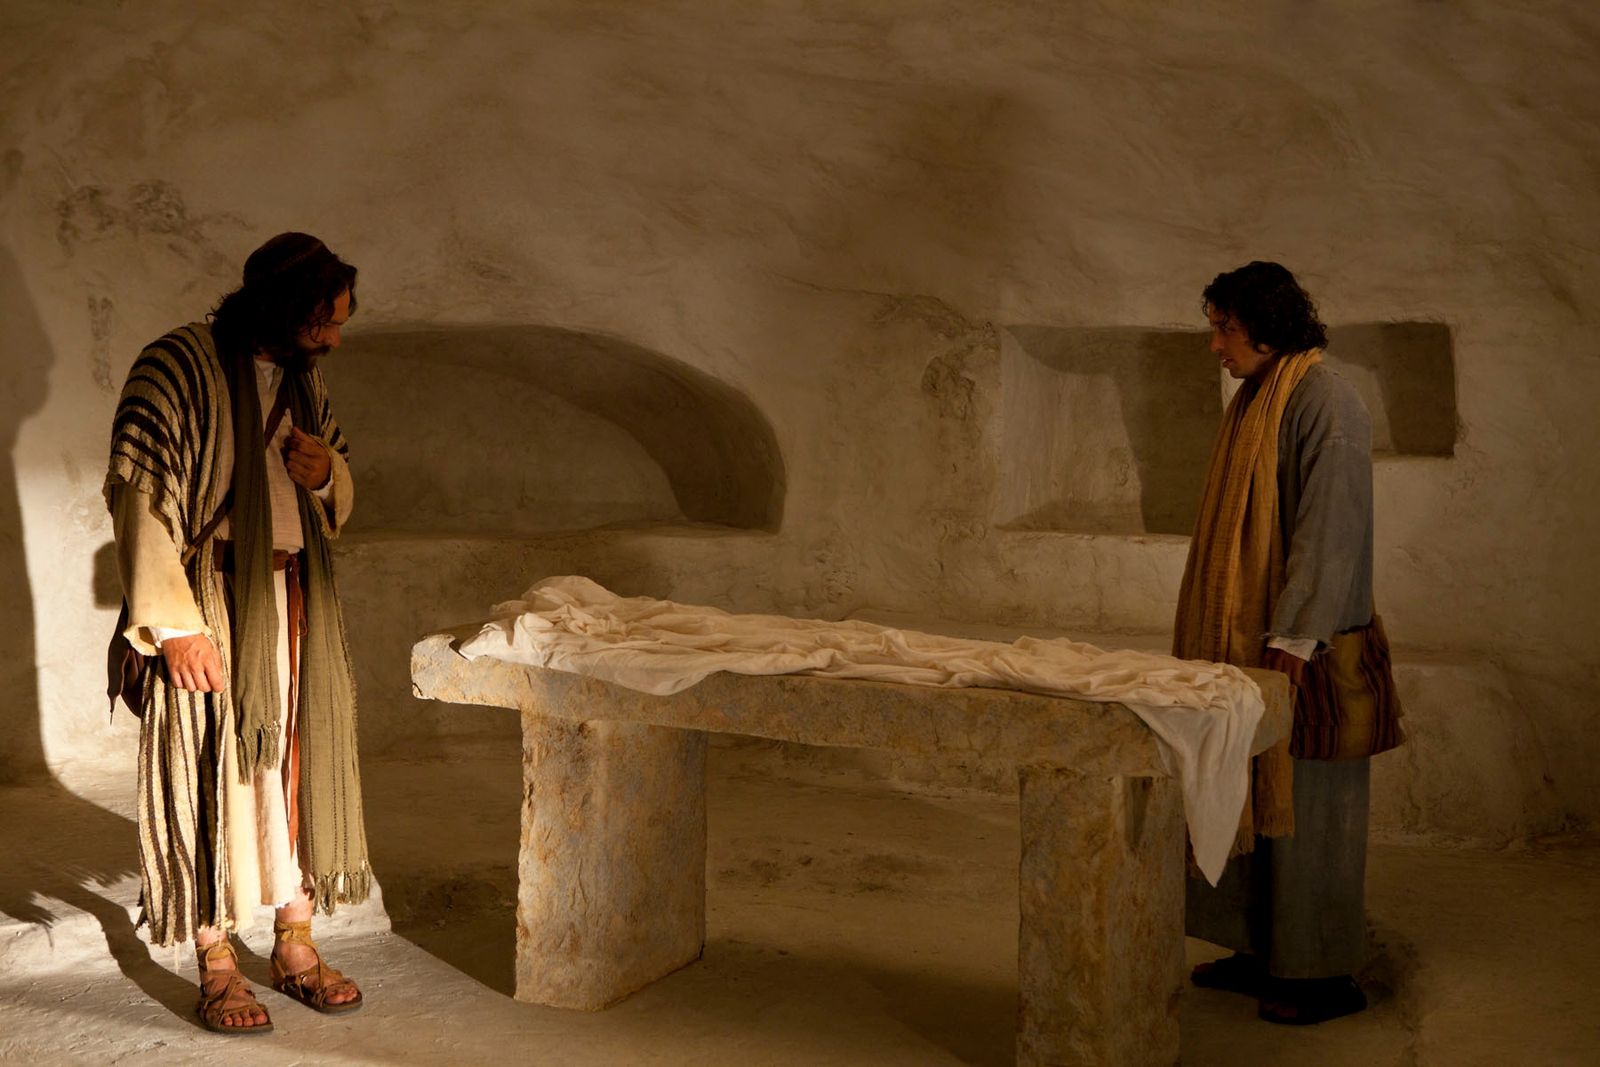 Peter and John enter Christ's tomb to find that He is gone.